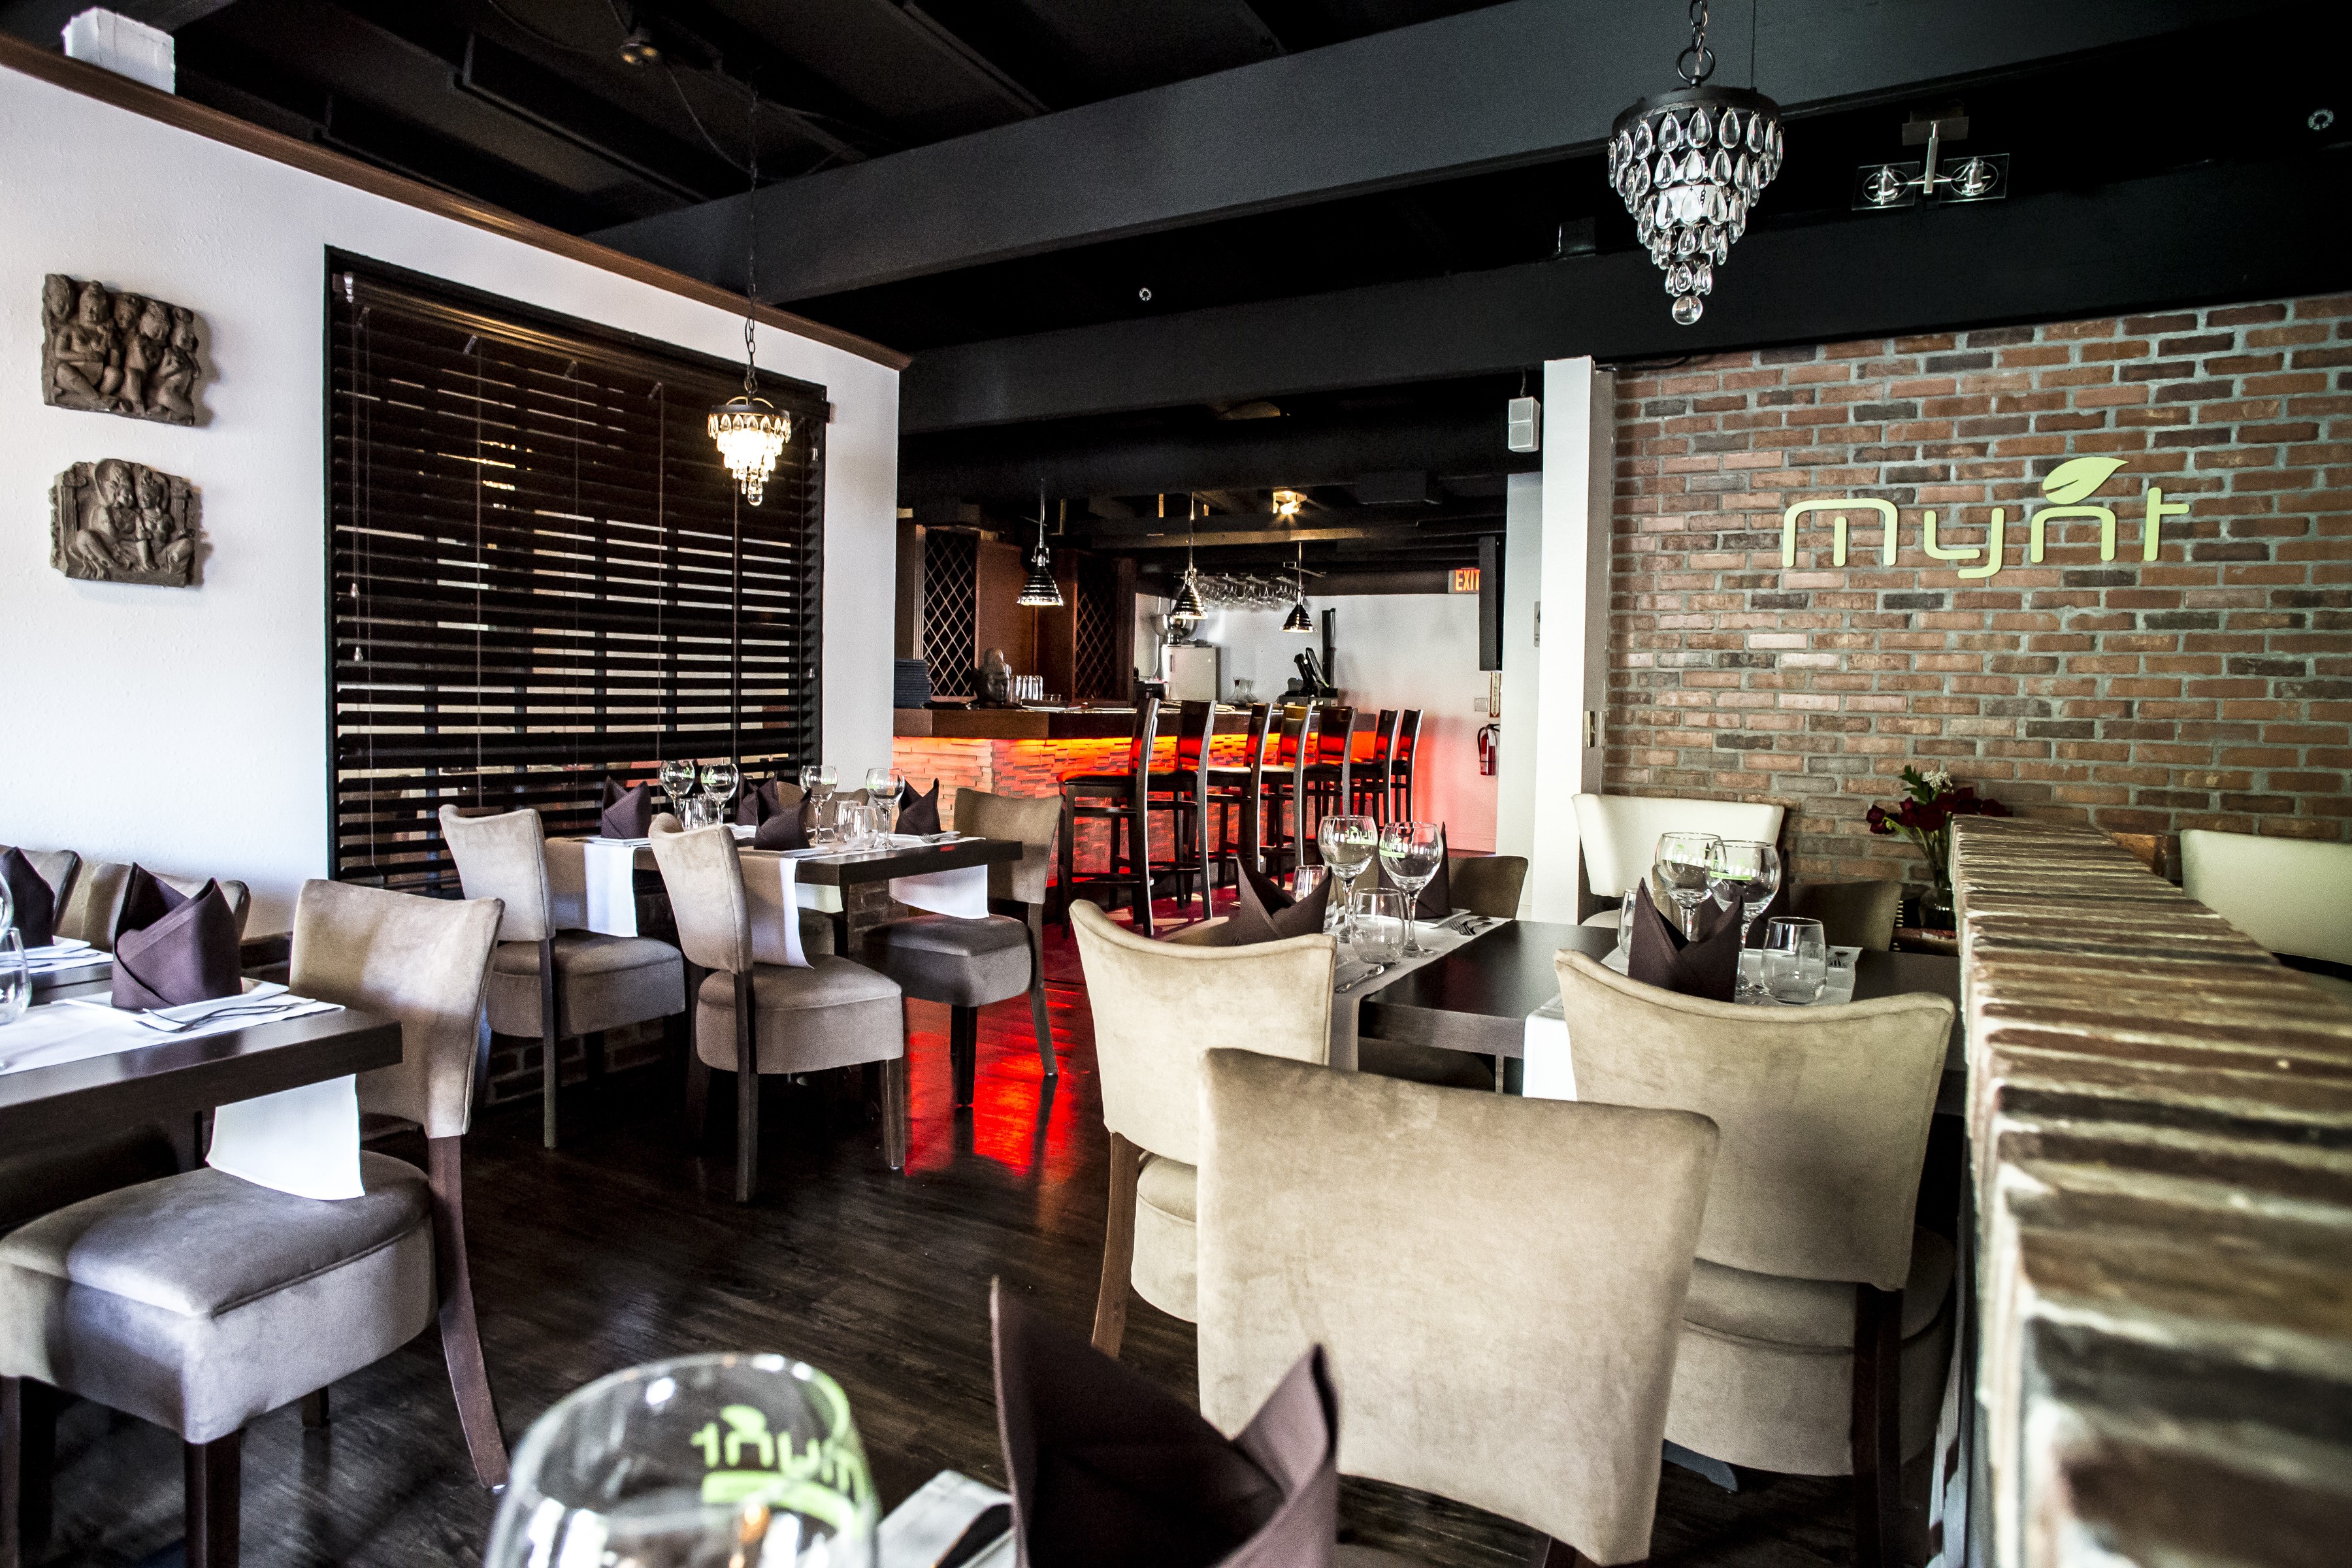 Aesthetics seem to be the main focus at Mynt, a new Indian eatery in Hannibal Square